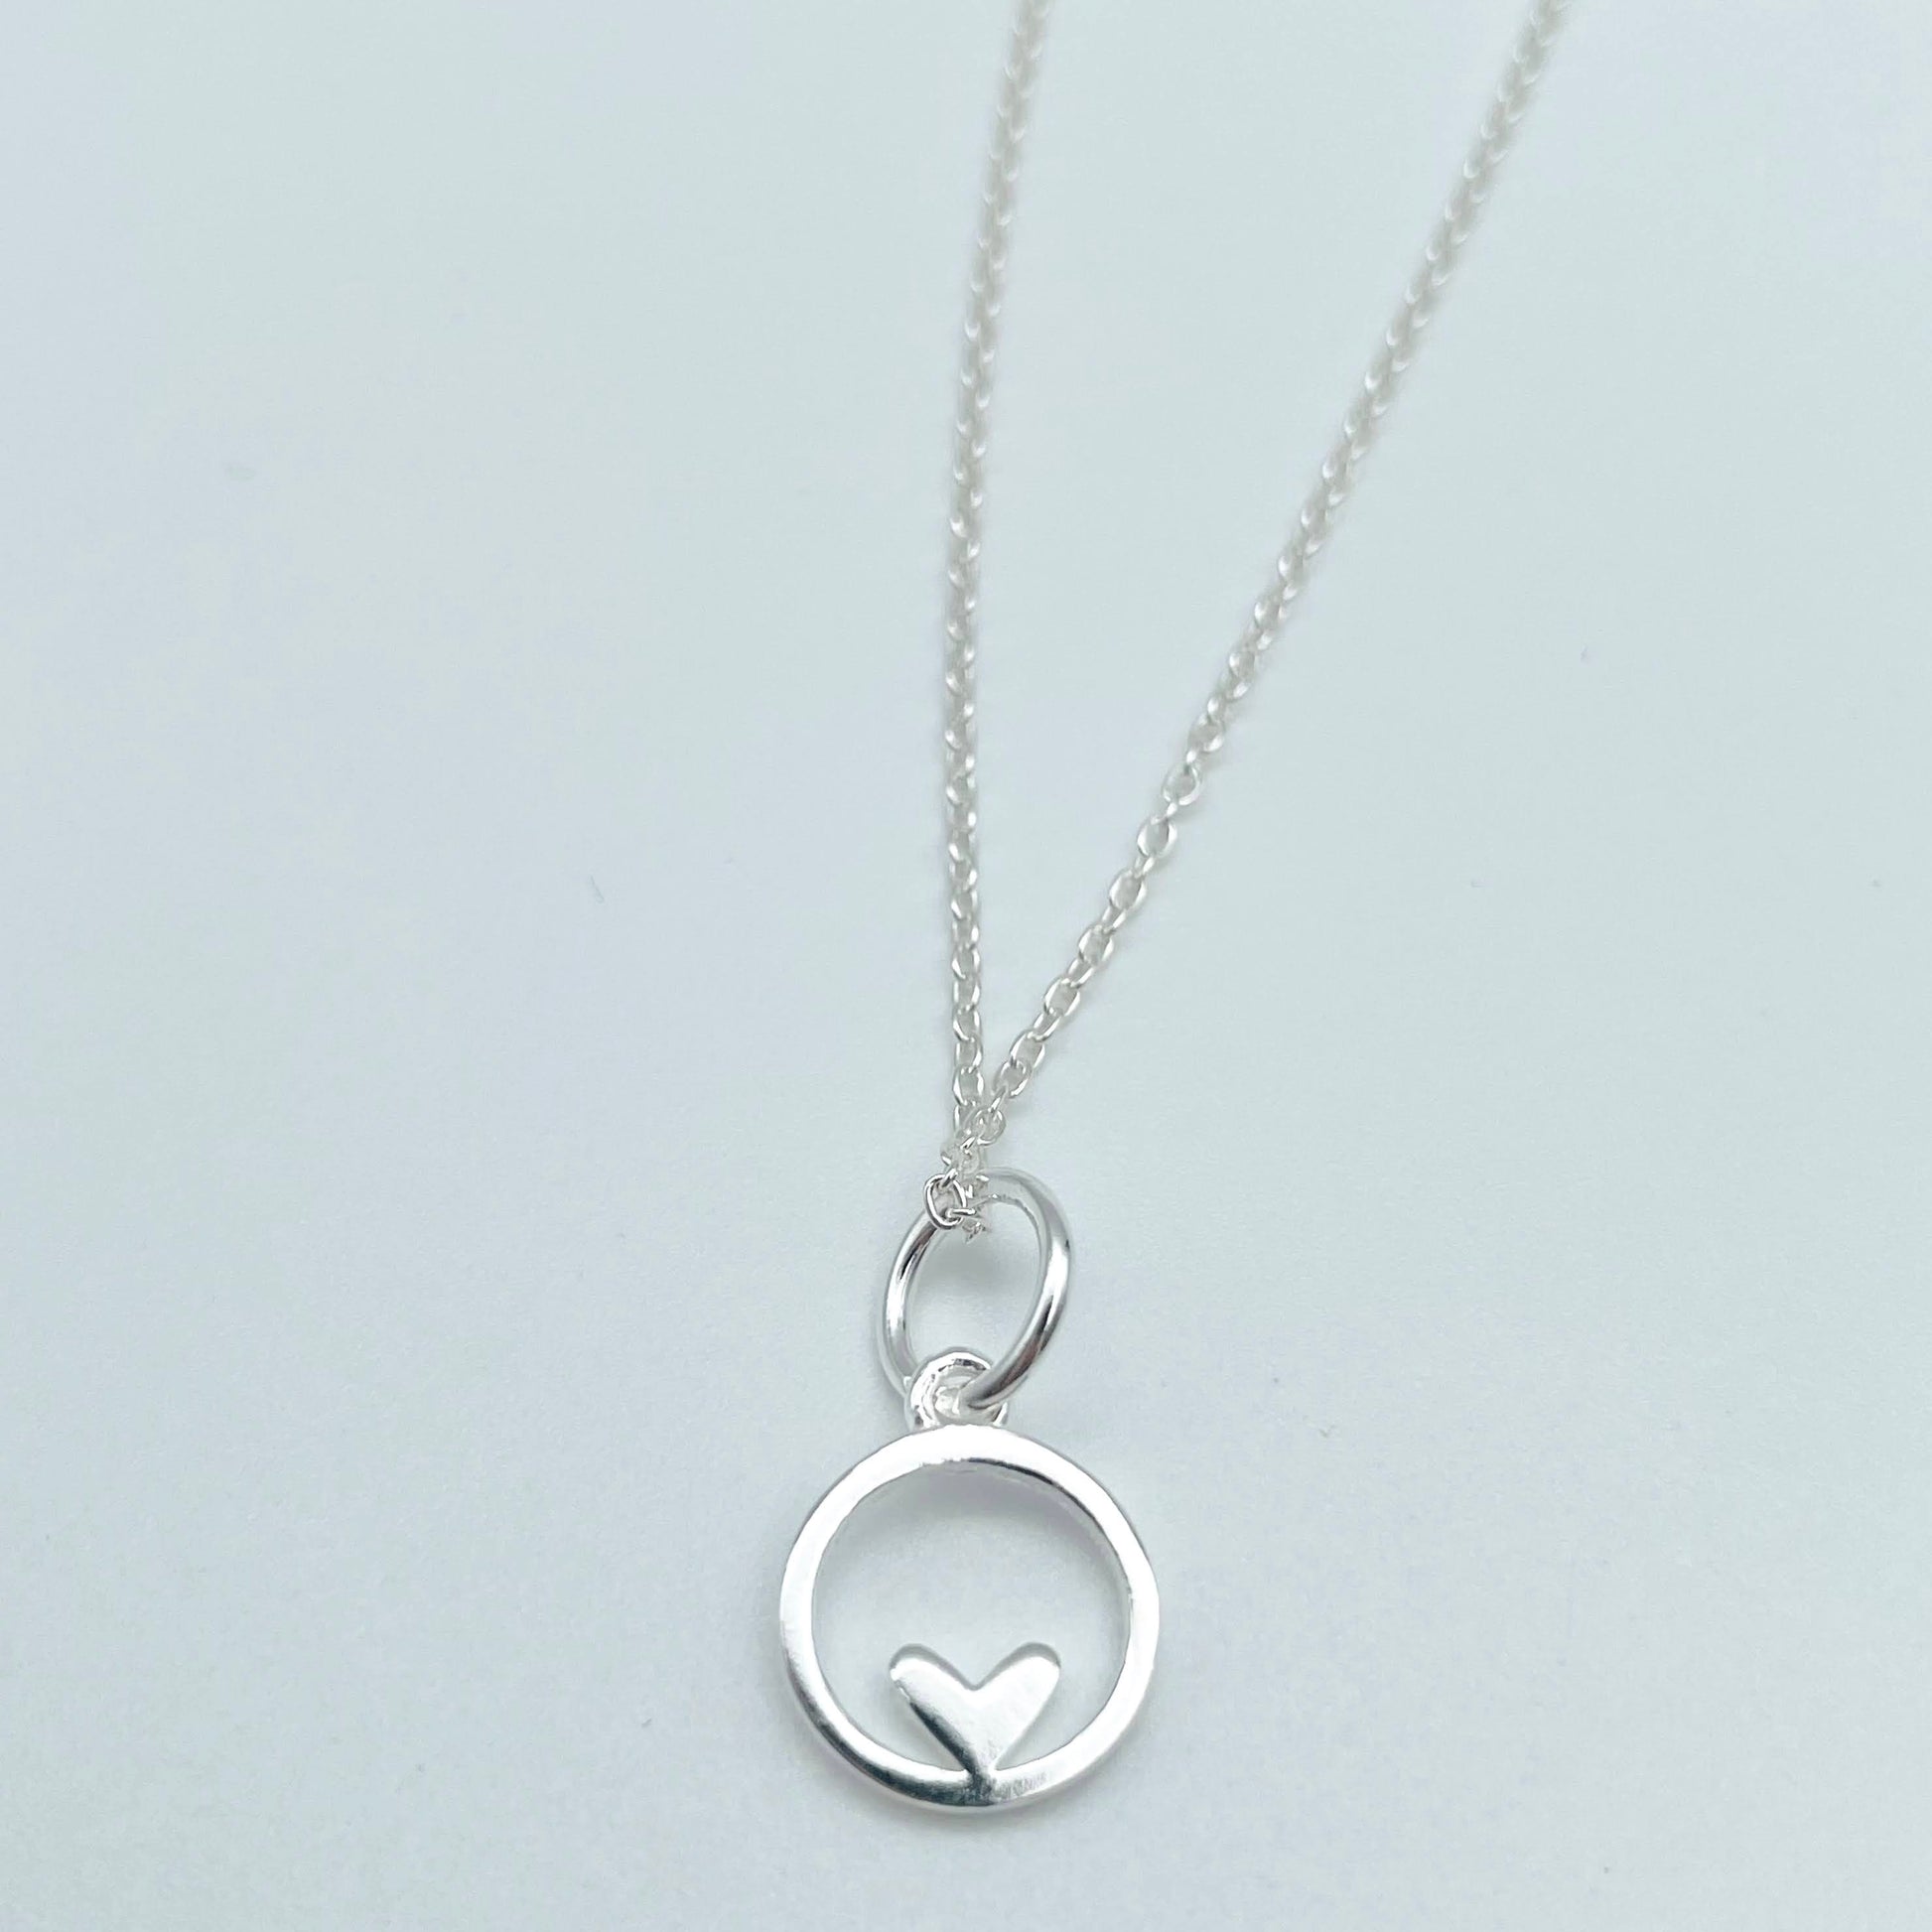 A small sterling silver circle encases a tiny sterling silver heart and is hung from a sterling silver chain. The necklace is placed in a glass bottle which also includes a scroll with a message in your wording. Part of our Message in a Bottle range. Your pendant includes a luxury gift pouch and eco-friendly packaging